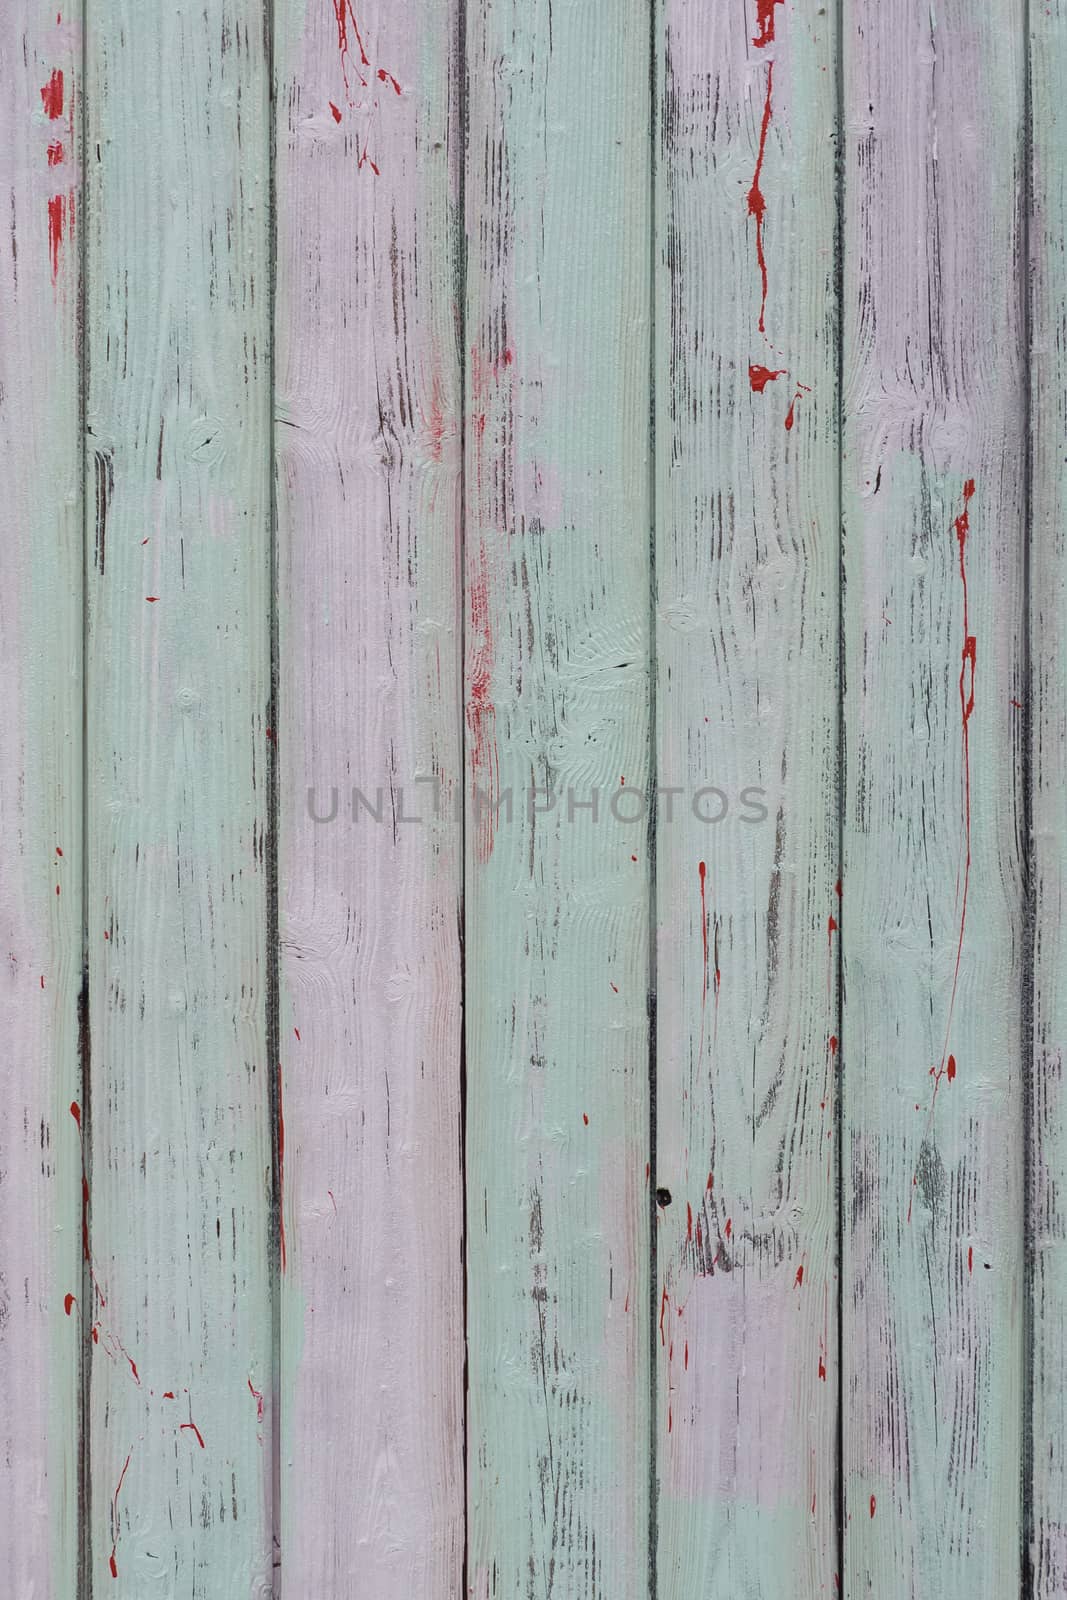 Background texture of wood, natural pattern by sandra_fotodesign